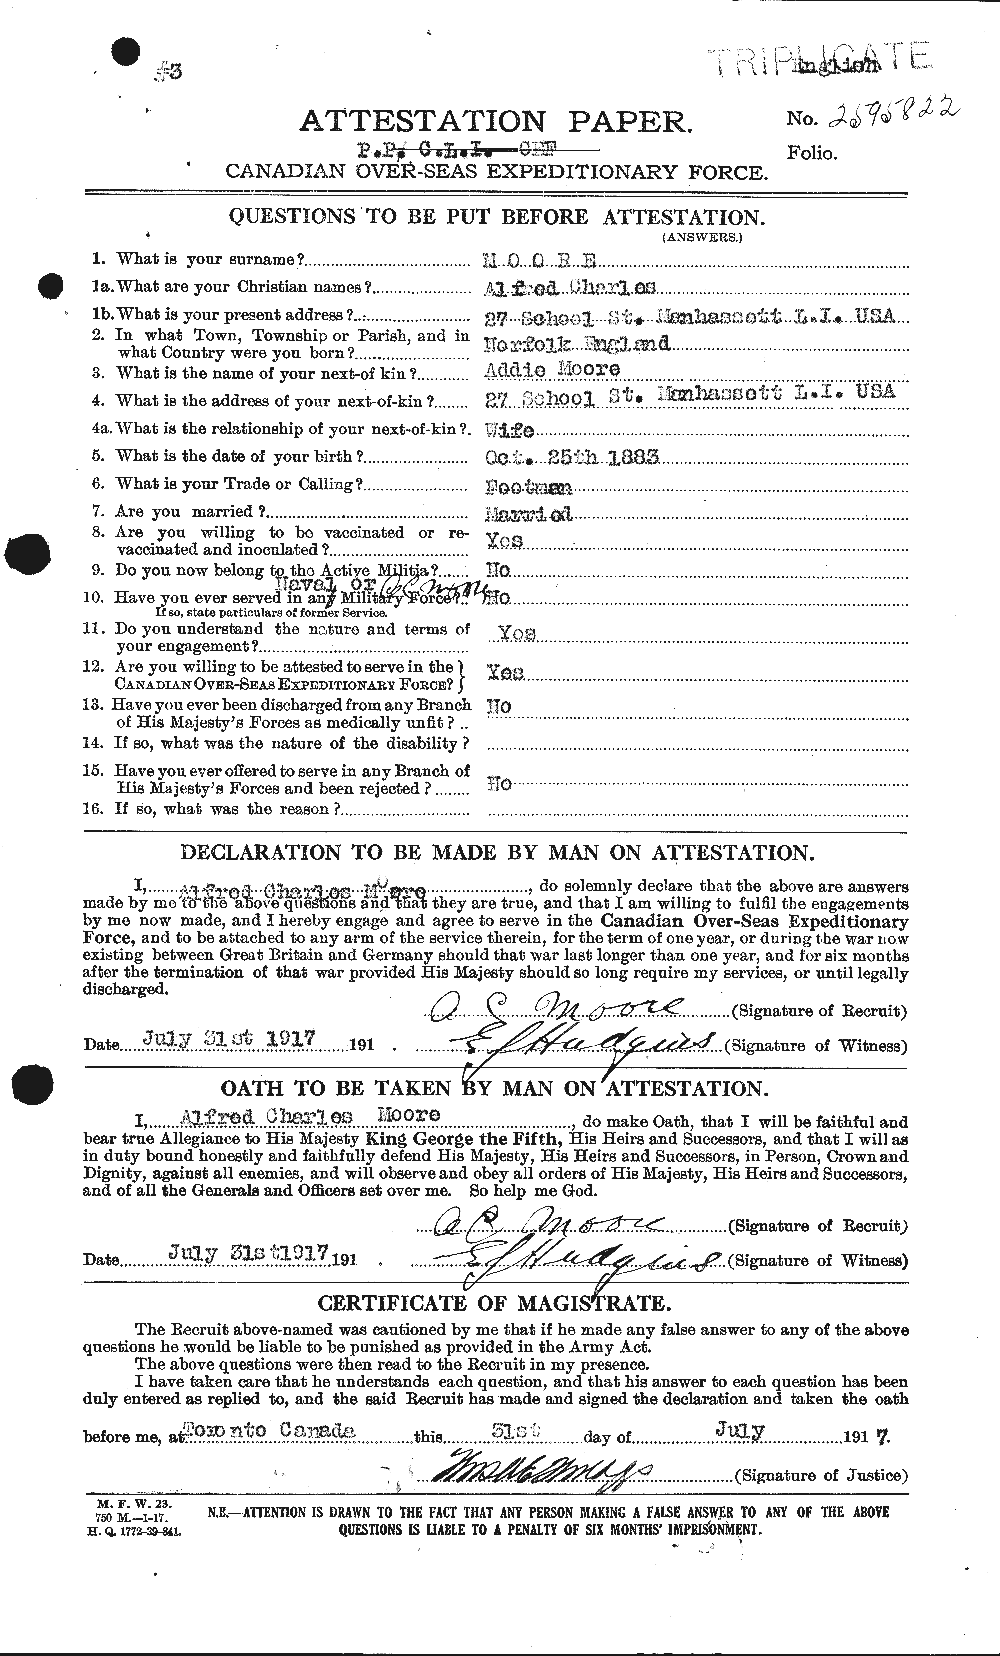 Personnel Records of the First World War - CEF 506387a